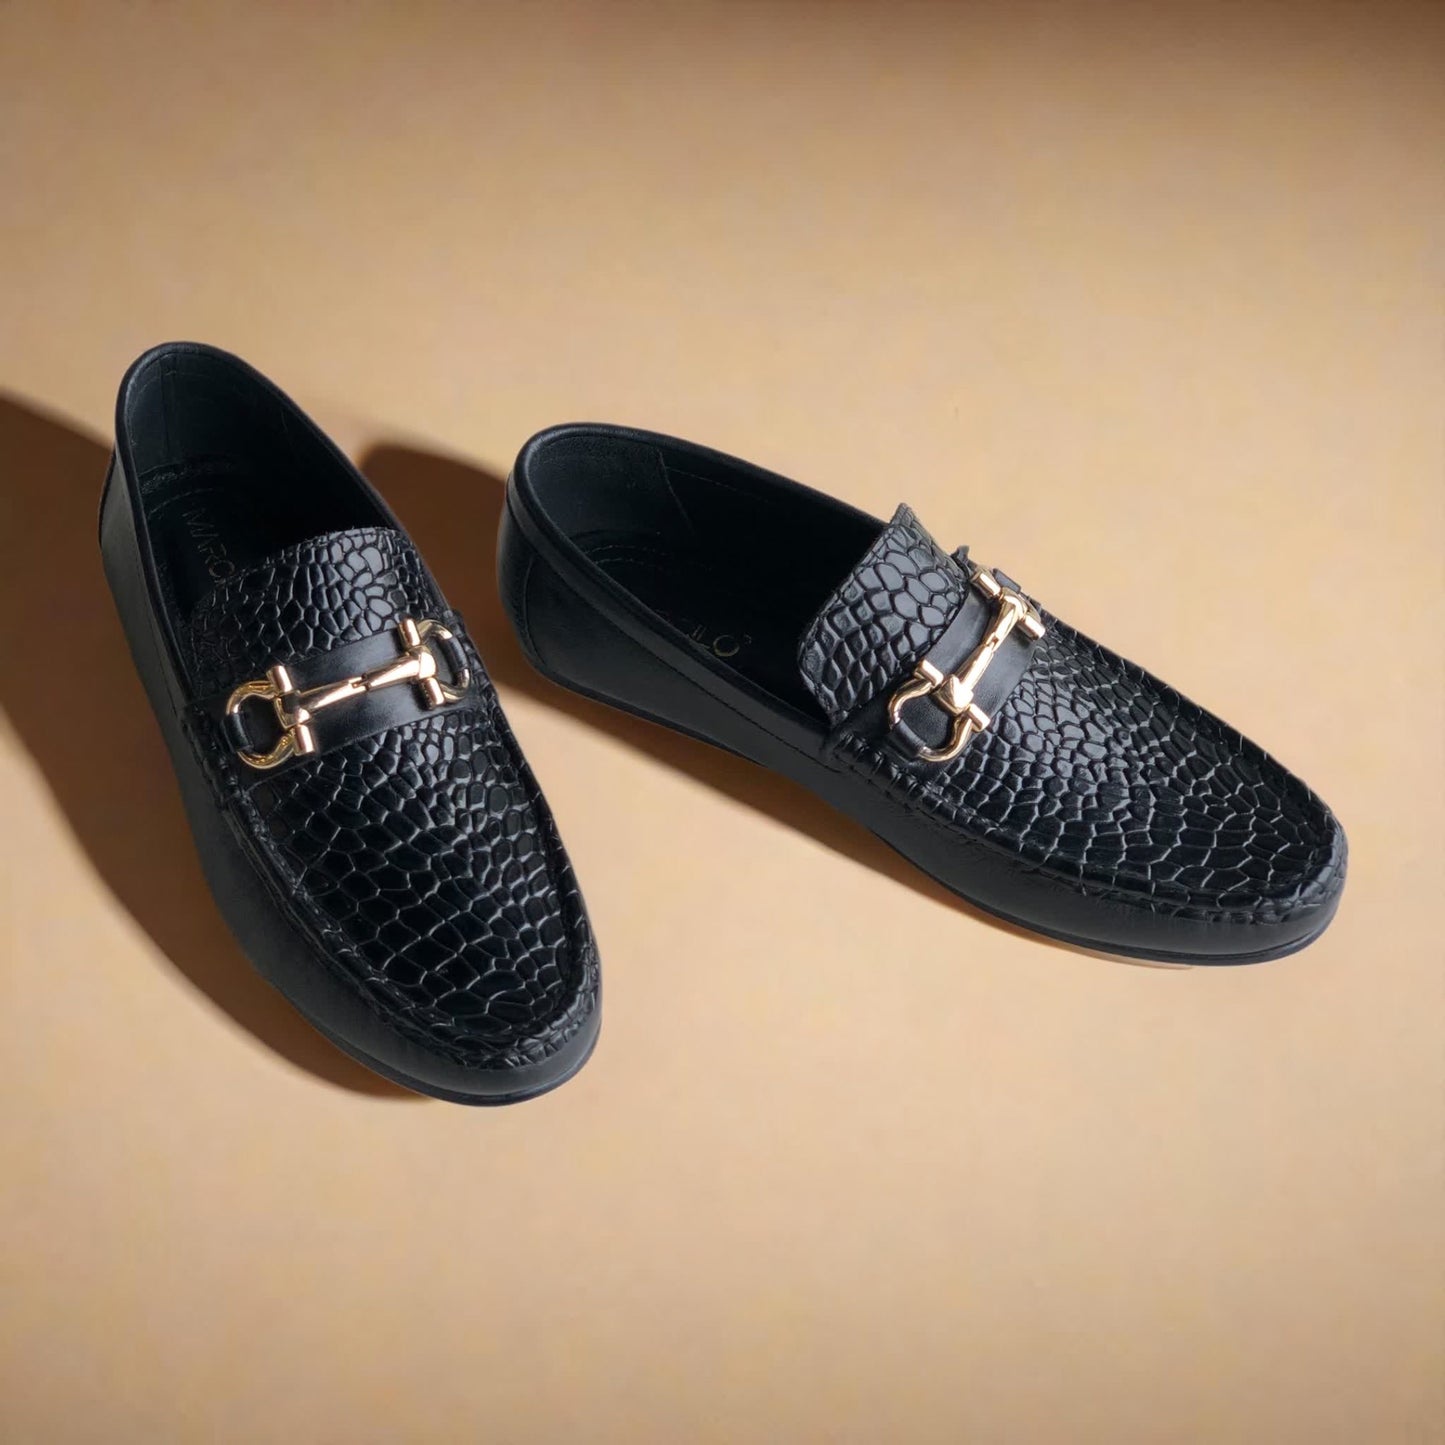 Black Croc Driving Loafers